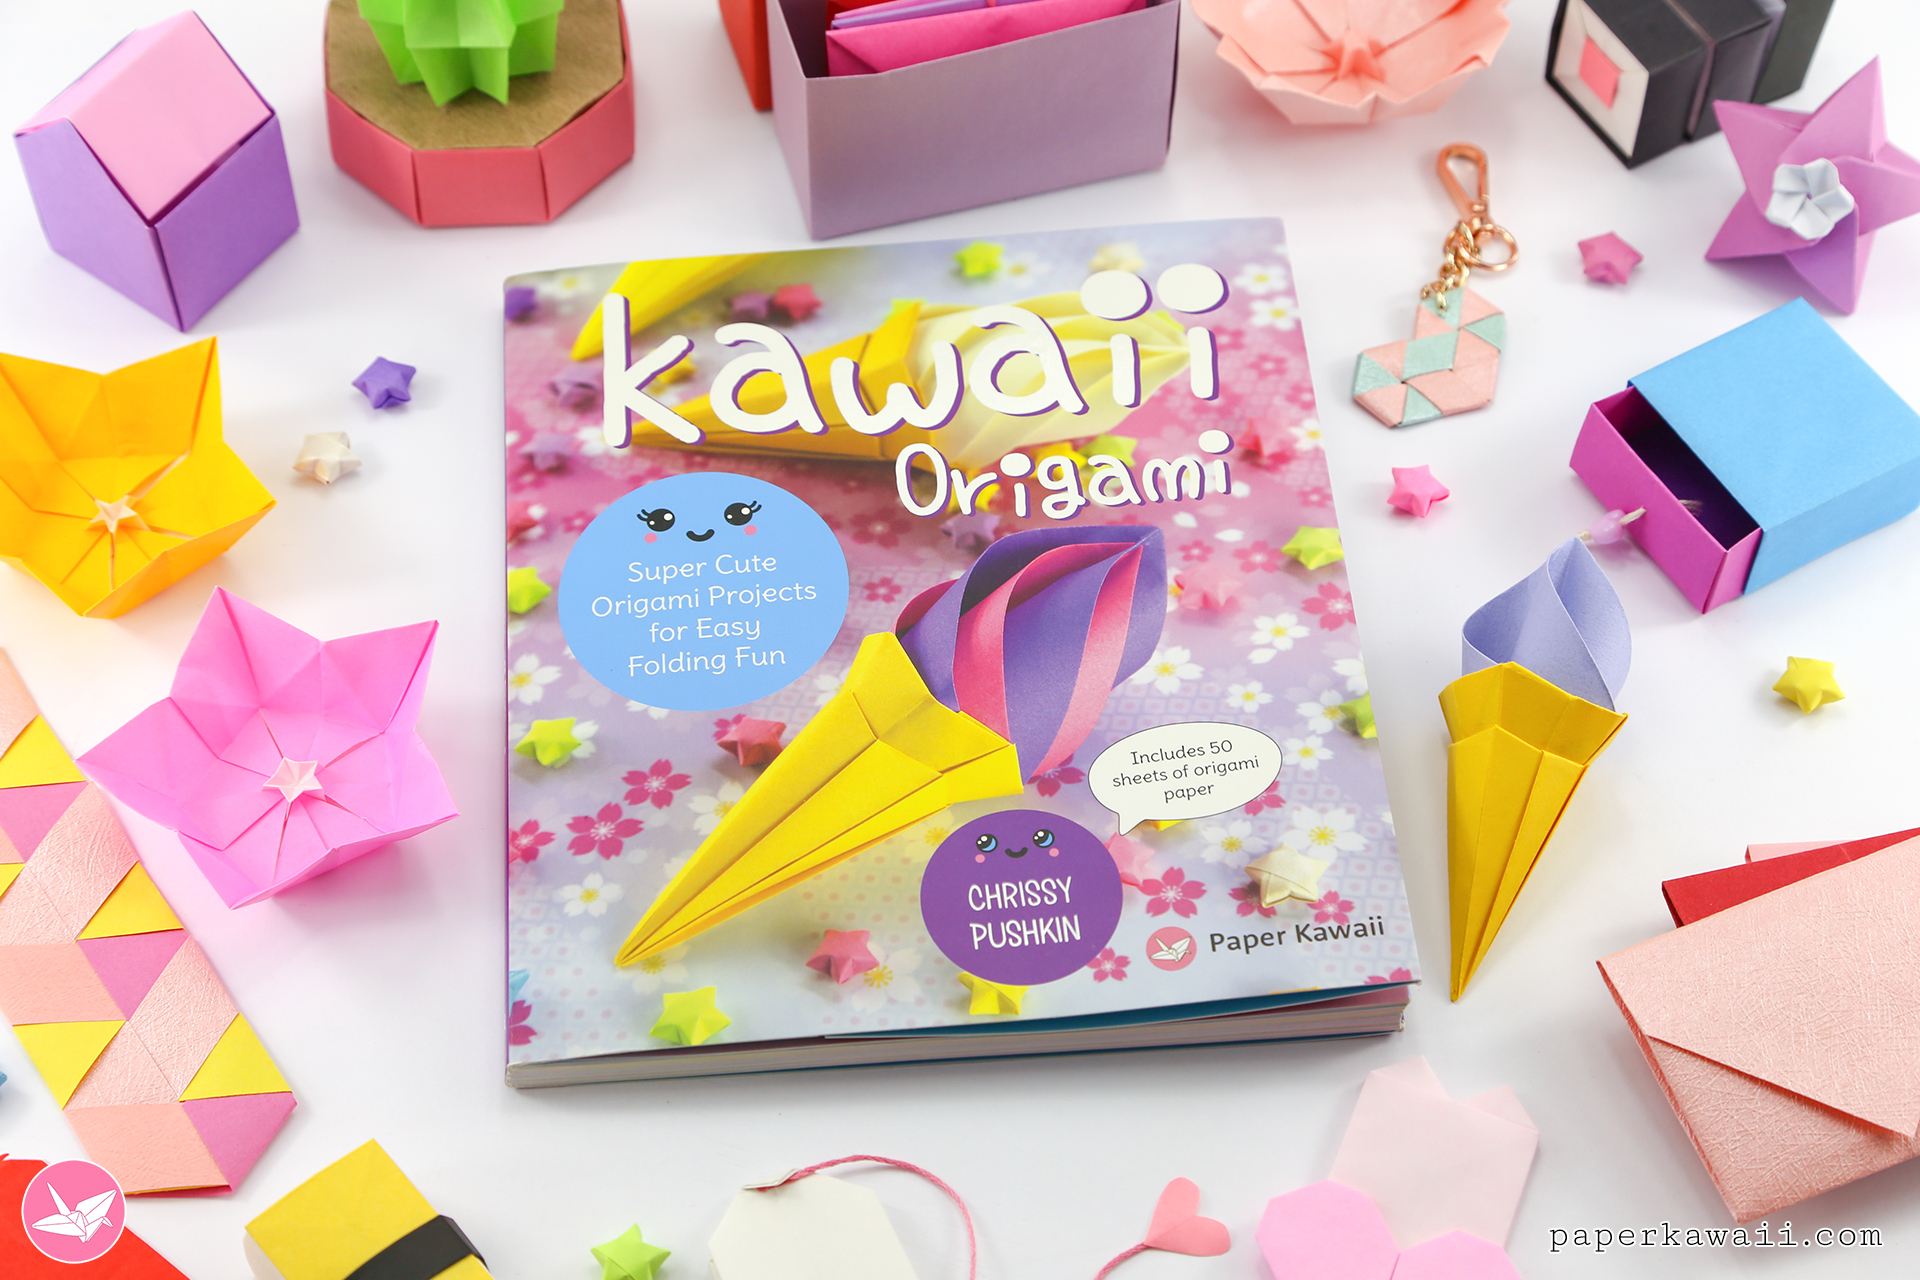 Origami Book Instructions Kawaii Origami Super Cute Origami Projects For Easy Folding Fun